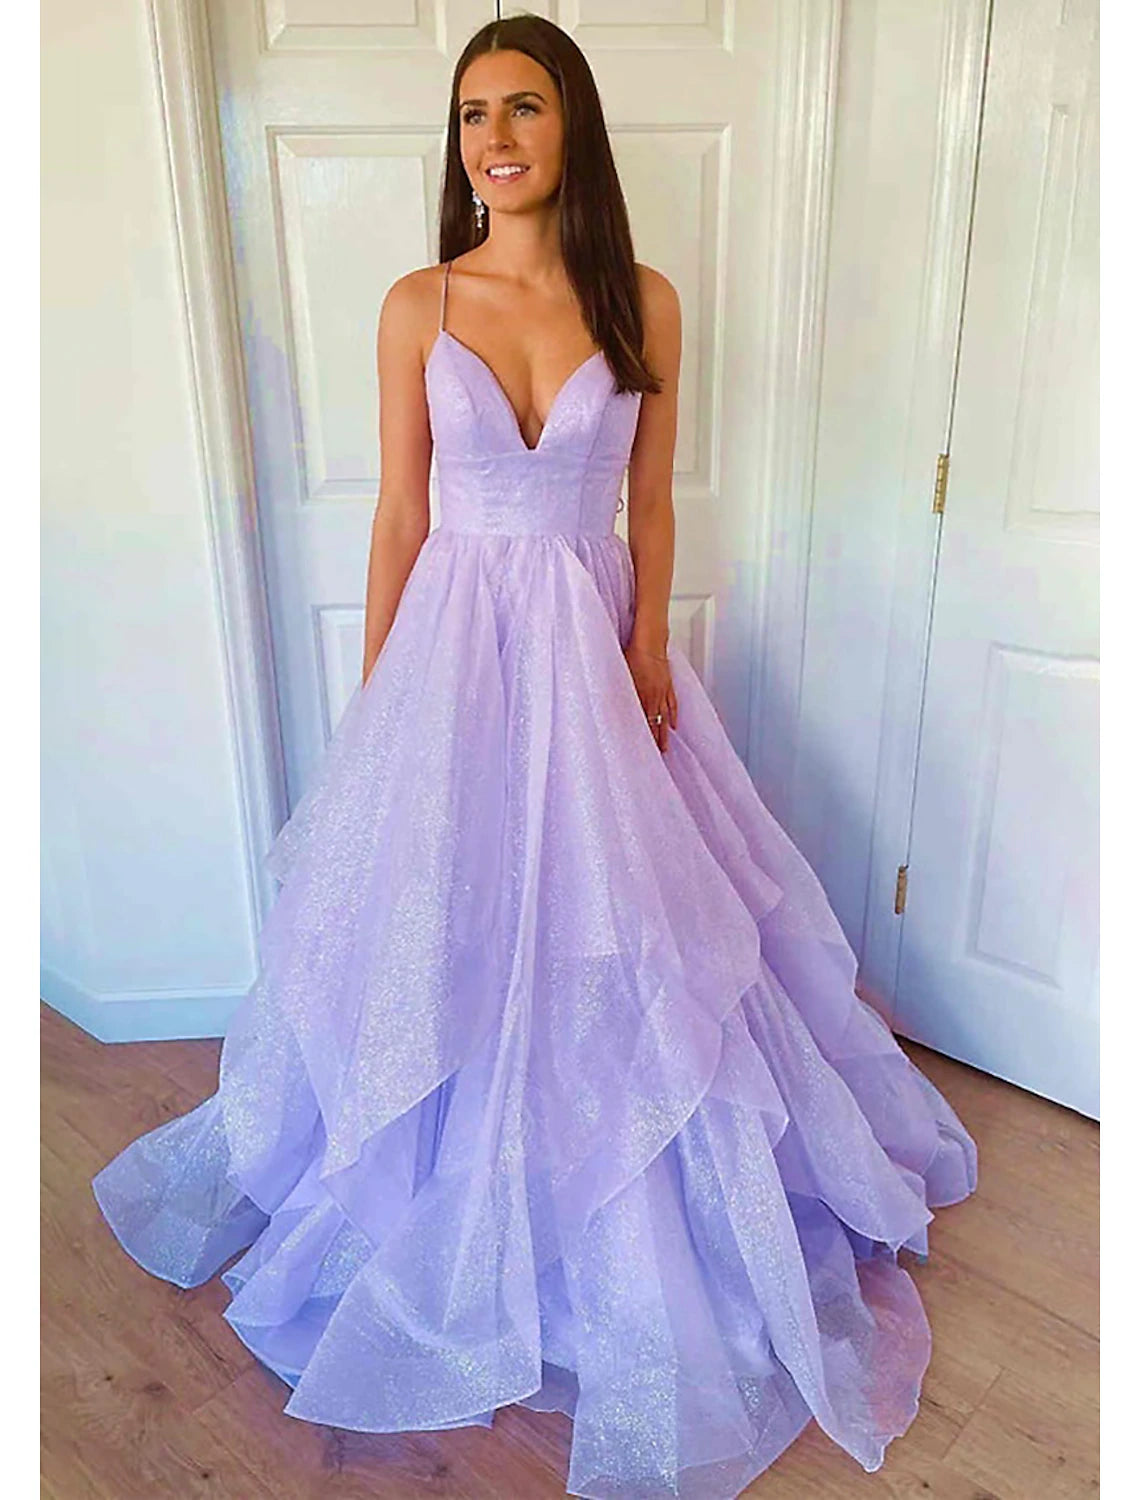 Ball Gown Prom Dresses Glittering Dress Wedding Party Court Train Sleeveless Spaghetti Strap Tulle Backless with Sequin Ruffles